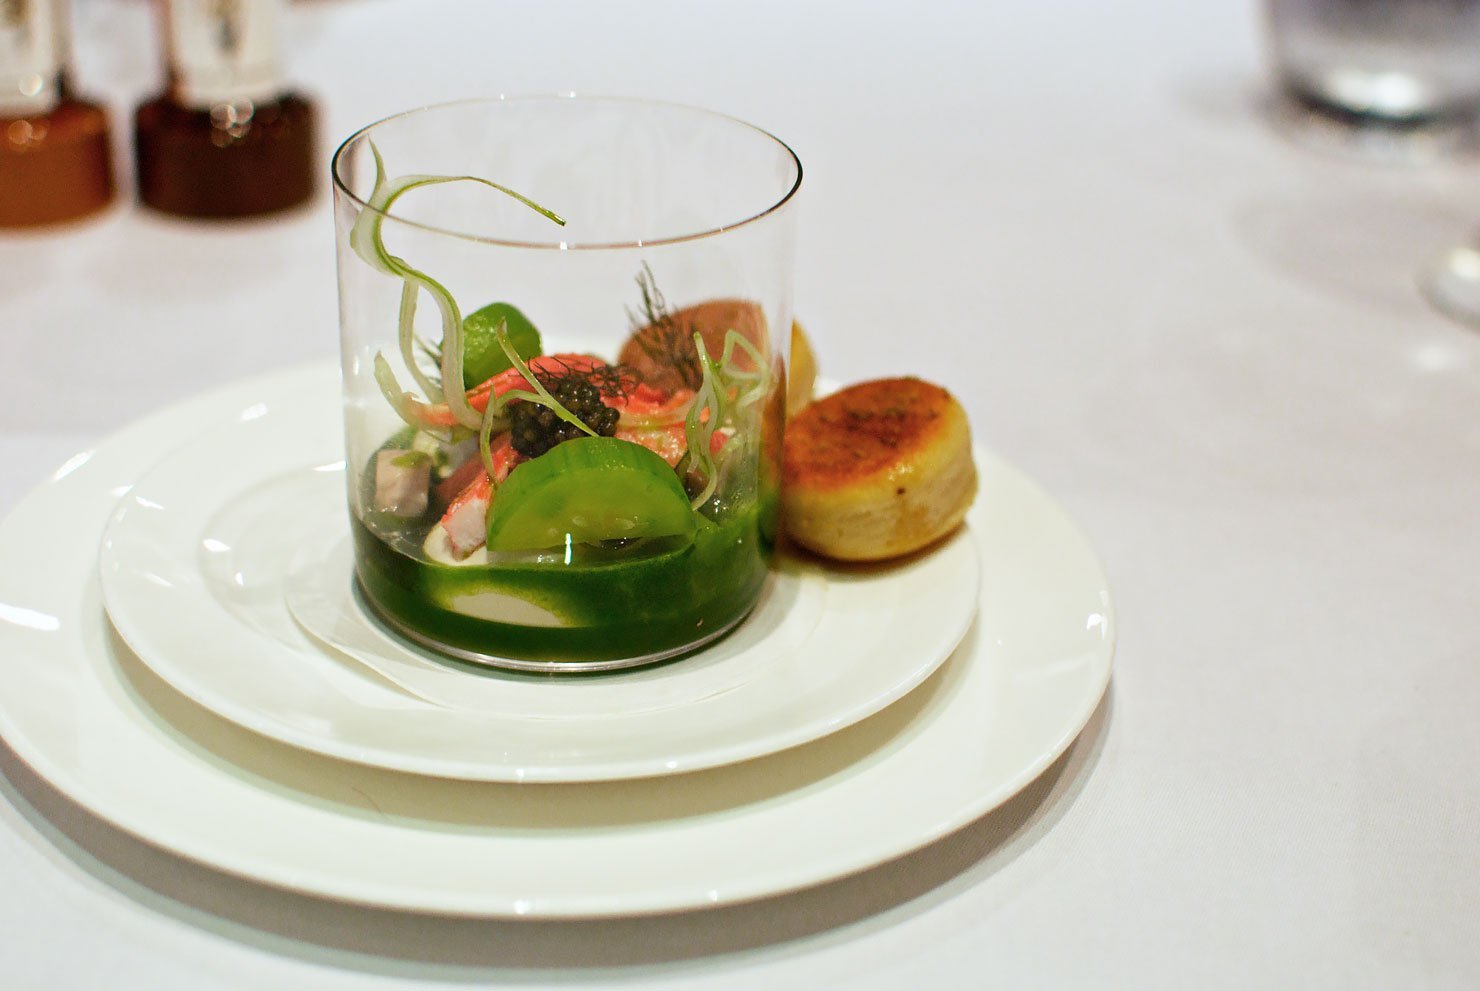 Review of a TRULY luxurious gift experience at The Square Restaurant in London. Starter: Oyster cream with langoustine claws.